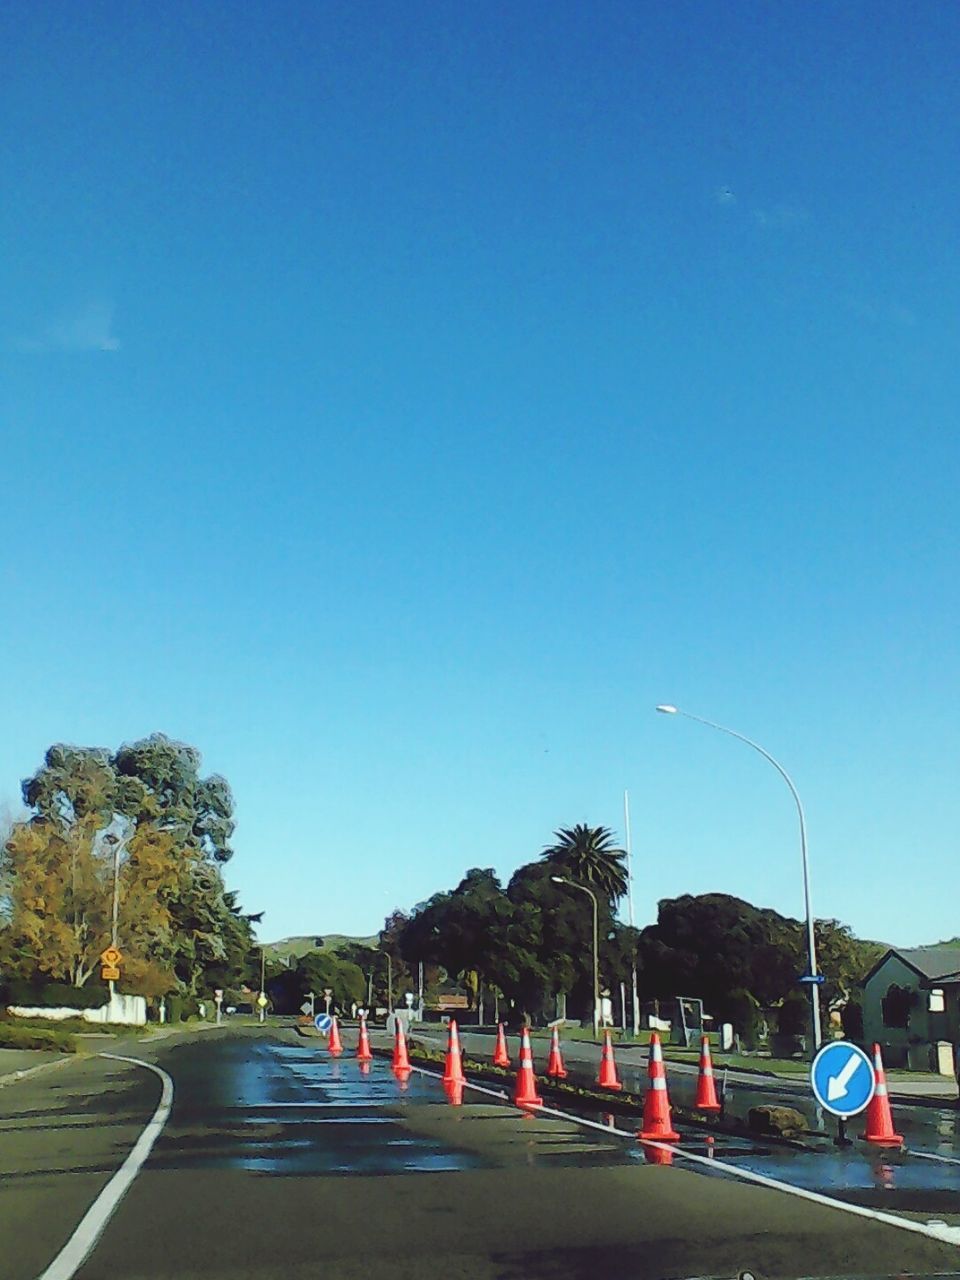 ROAD AGAINST CLEAR BLUE SKY